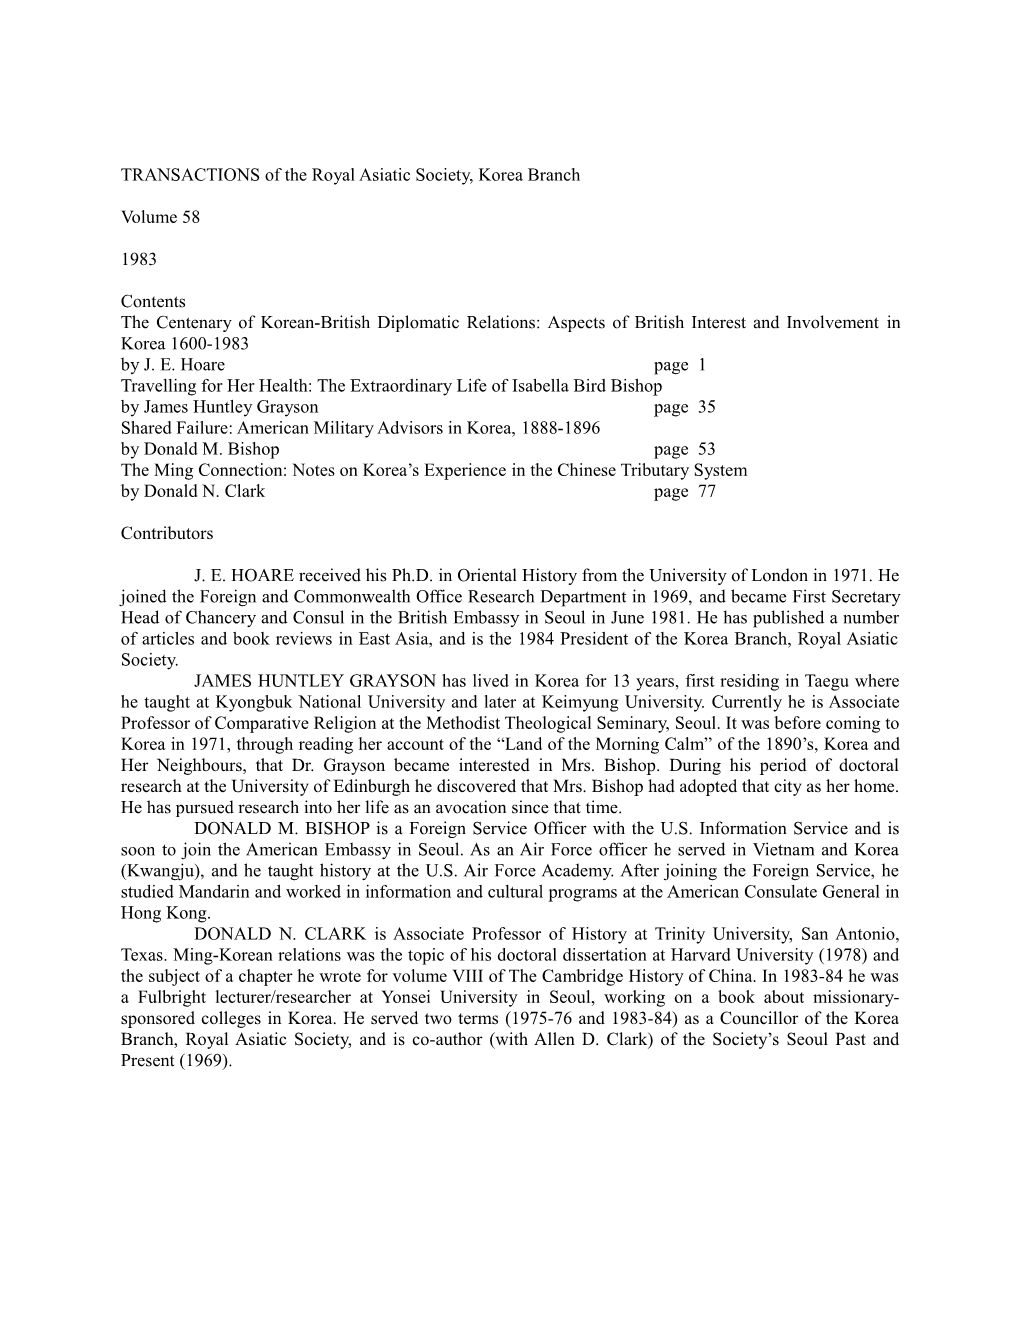 TRANSACTIONS of the Royal Asiatic Society, Korea Branch s2